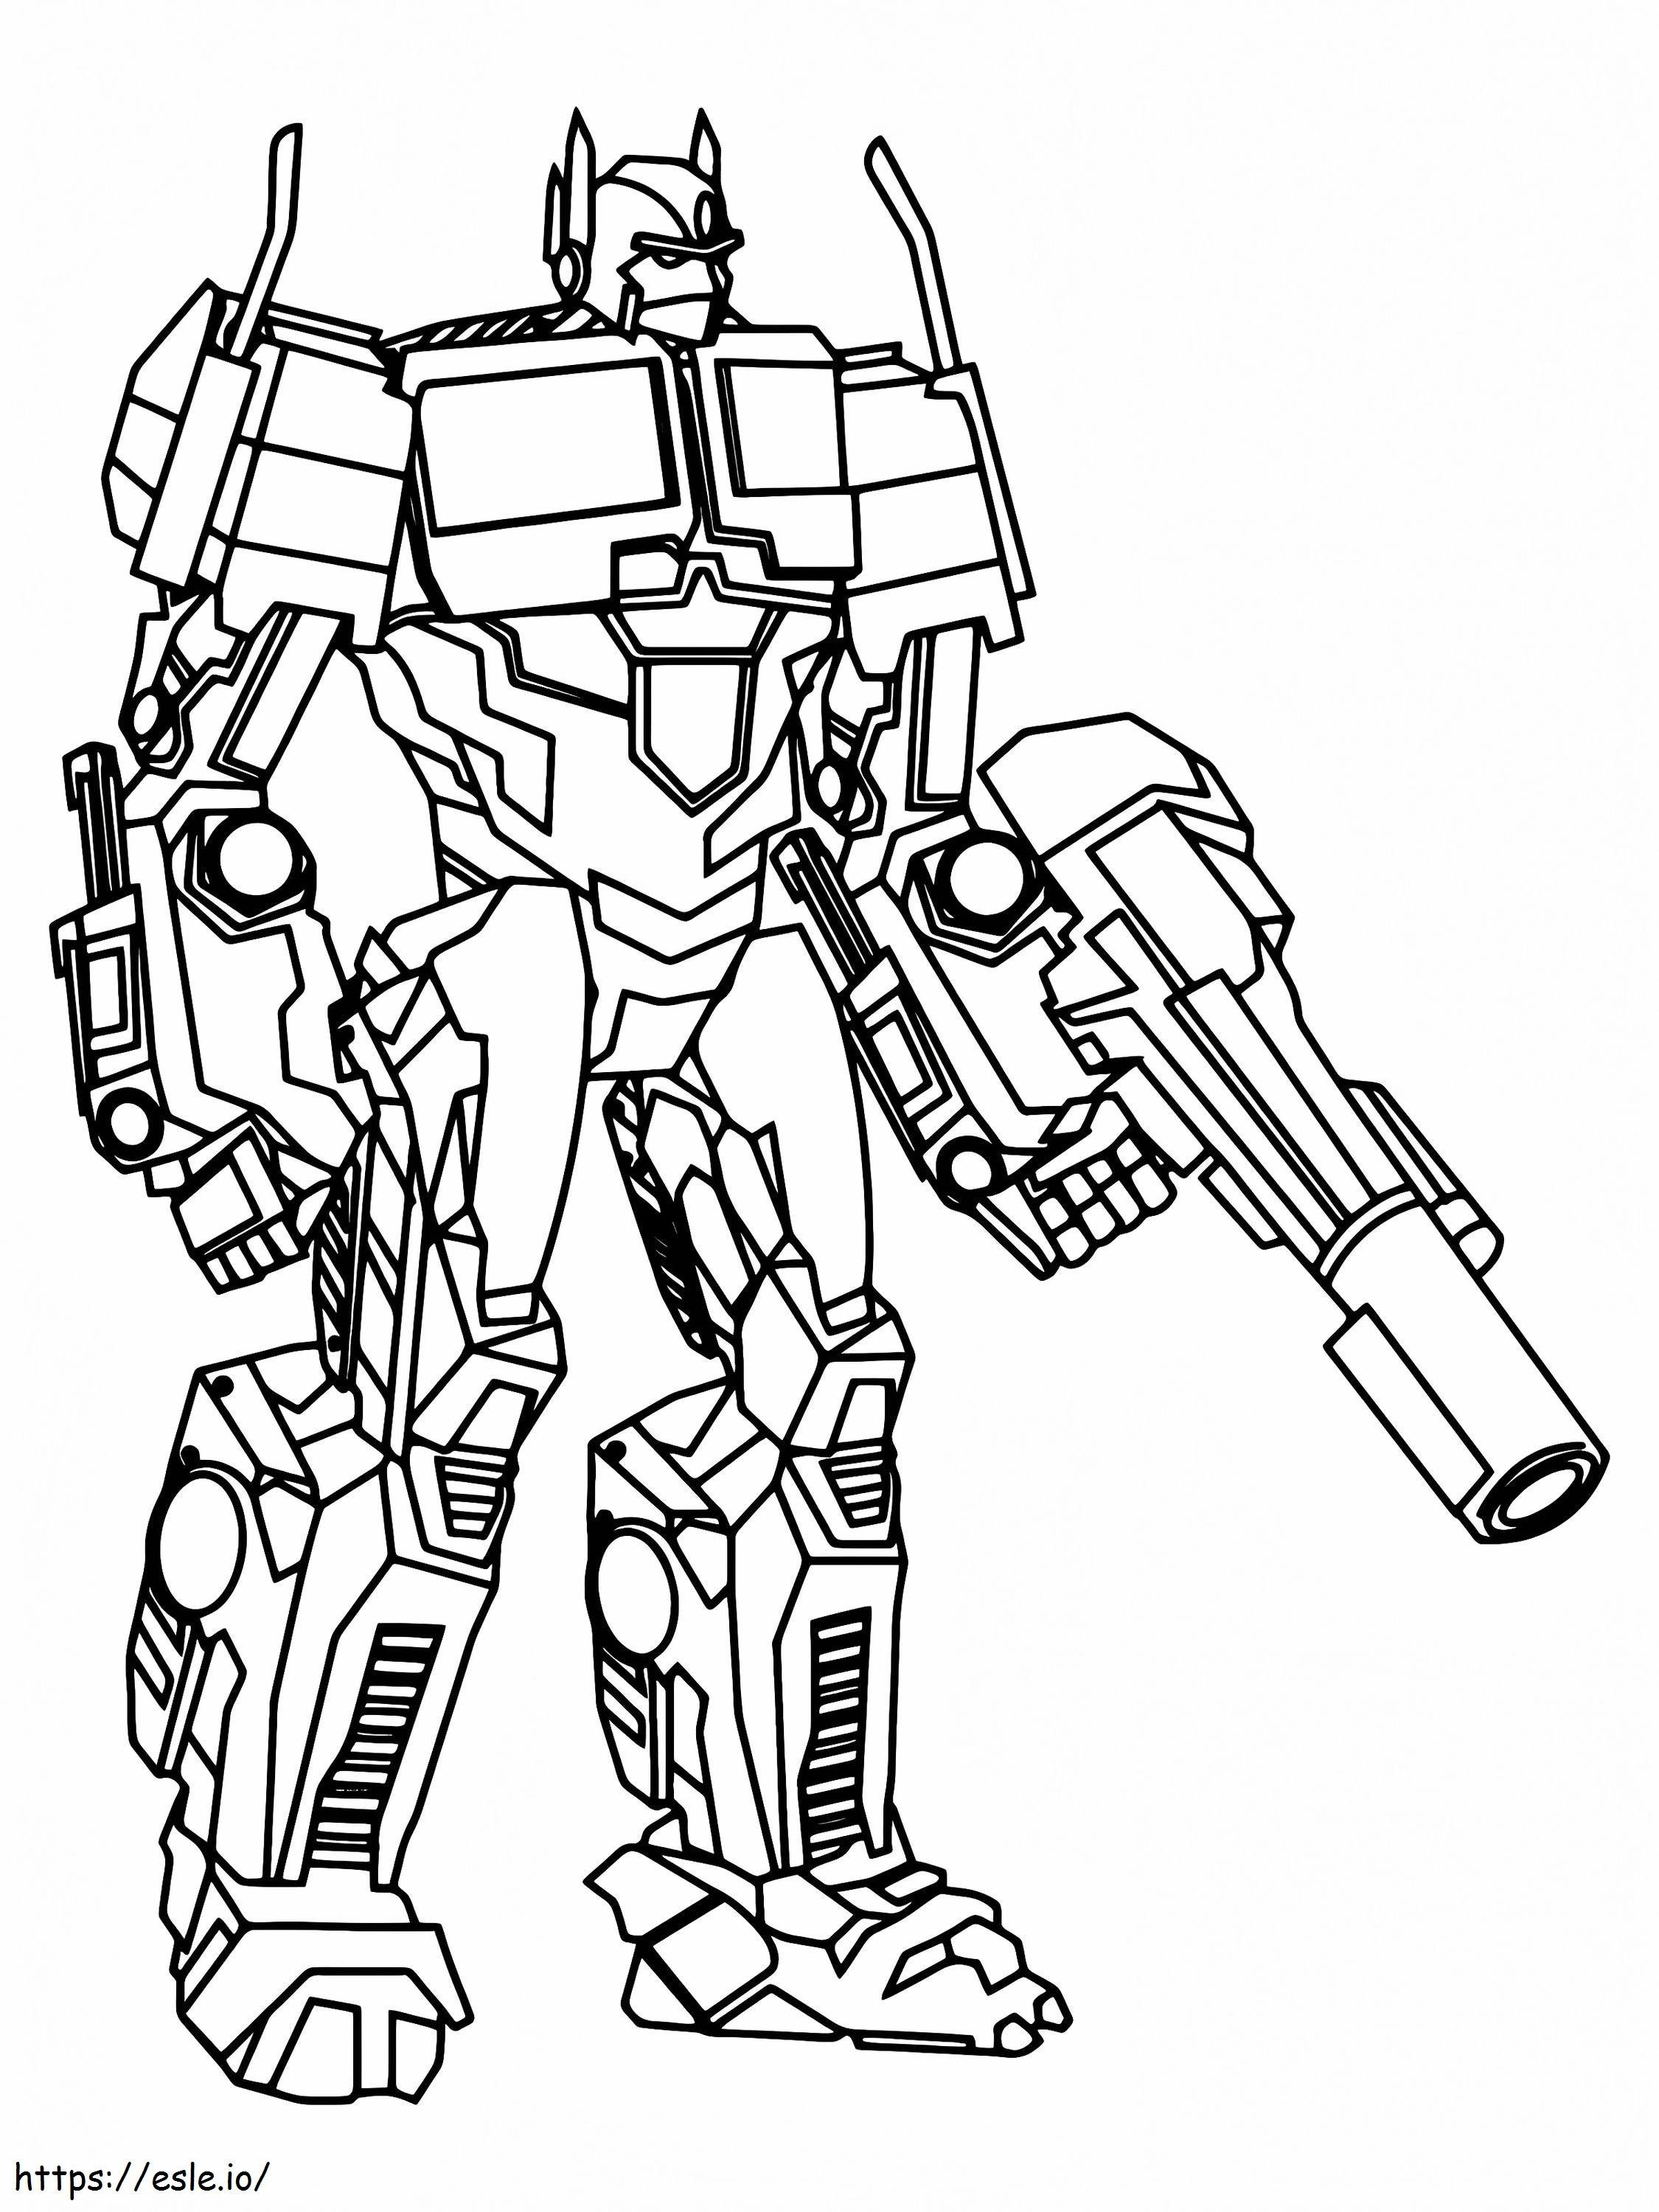 Warrior Bumblebee coloring page